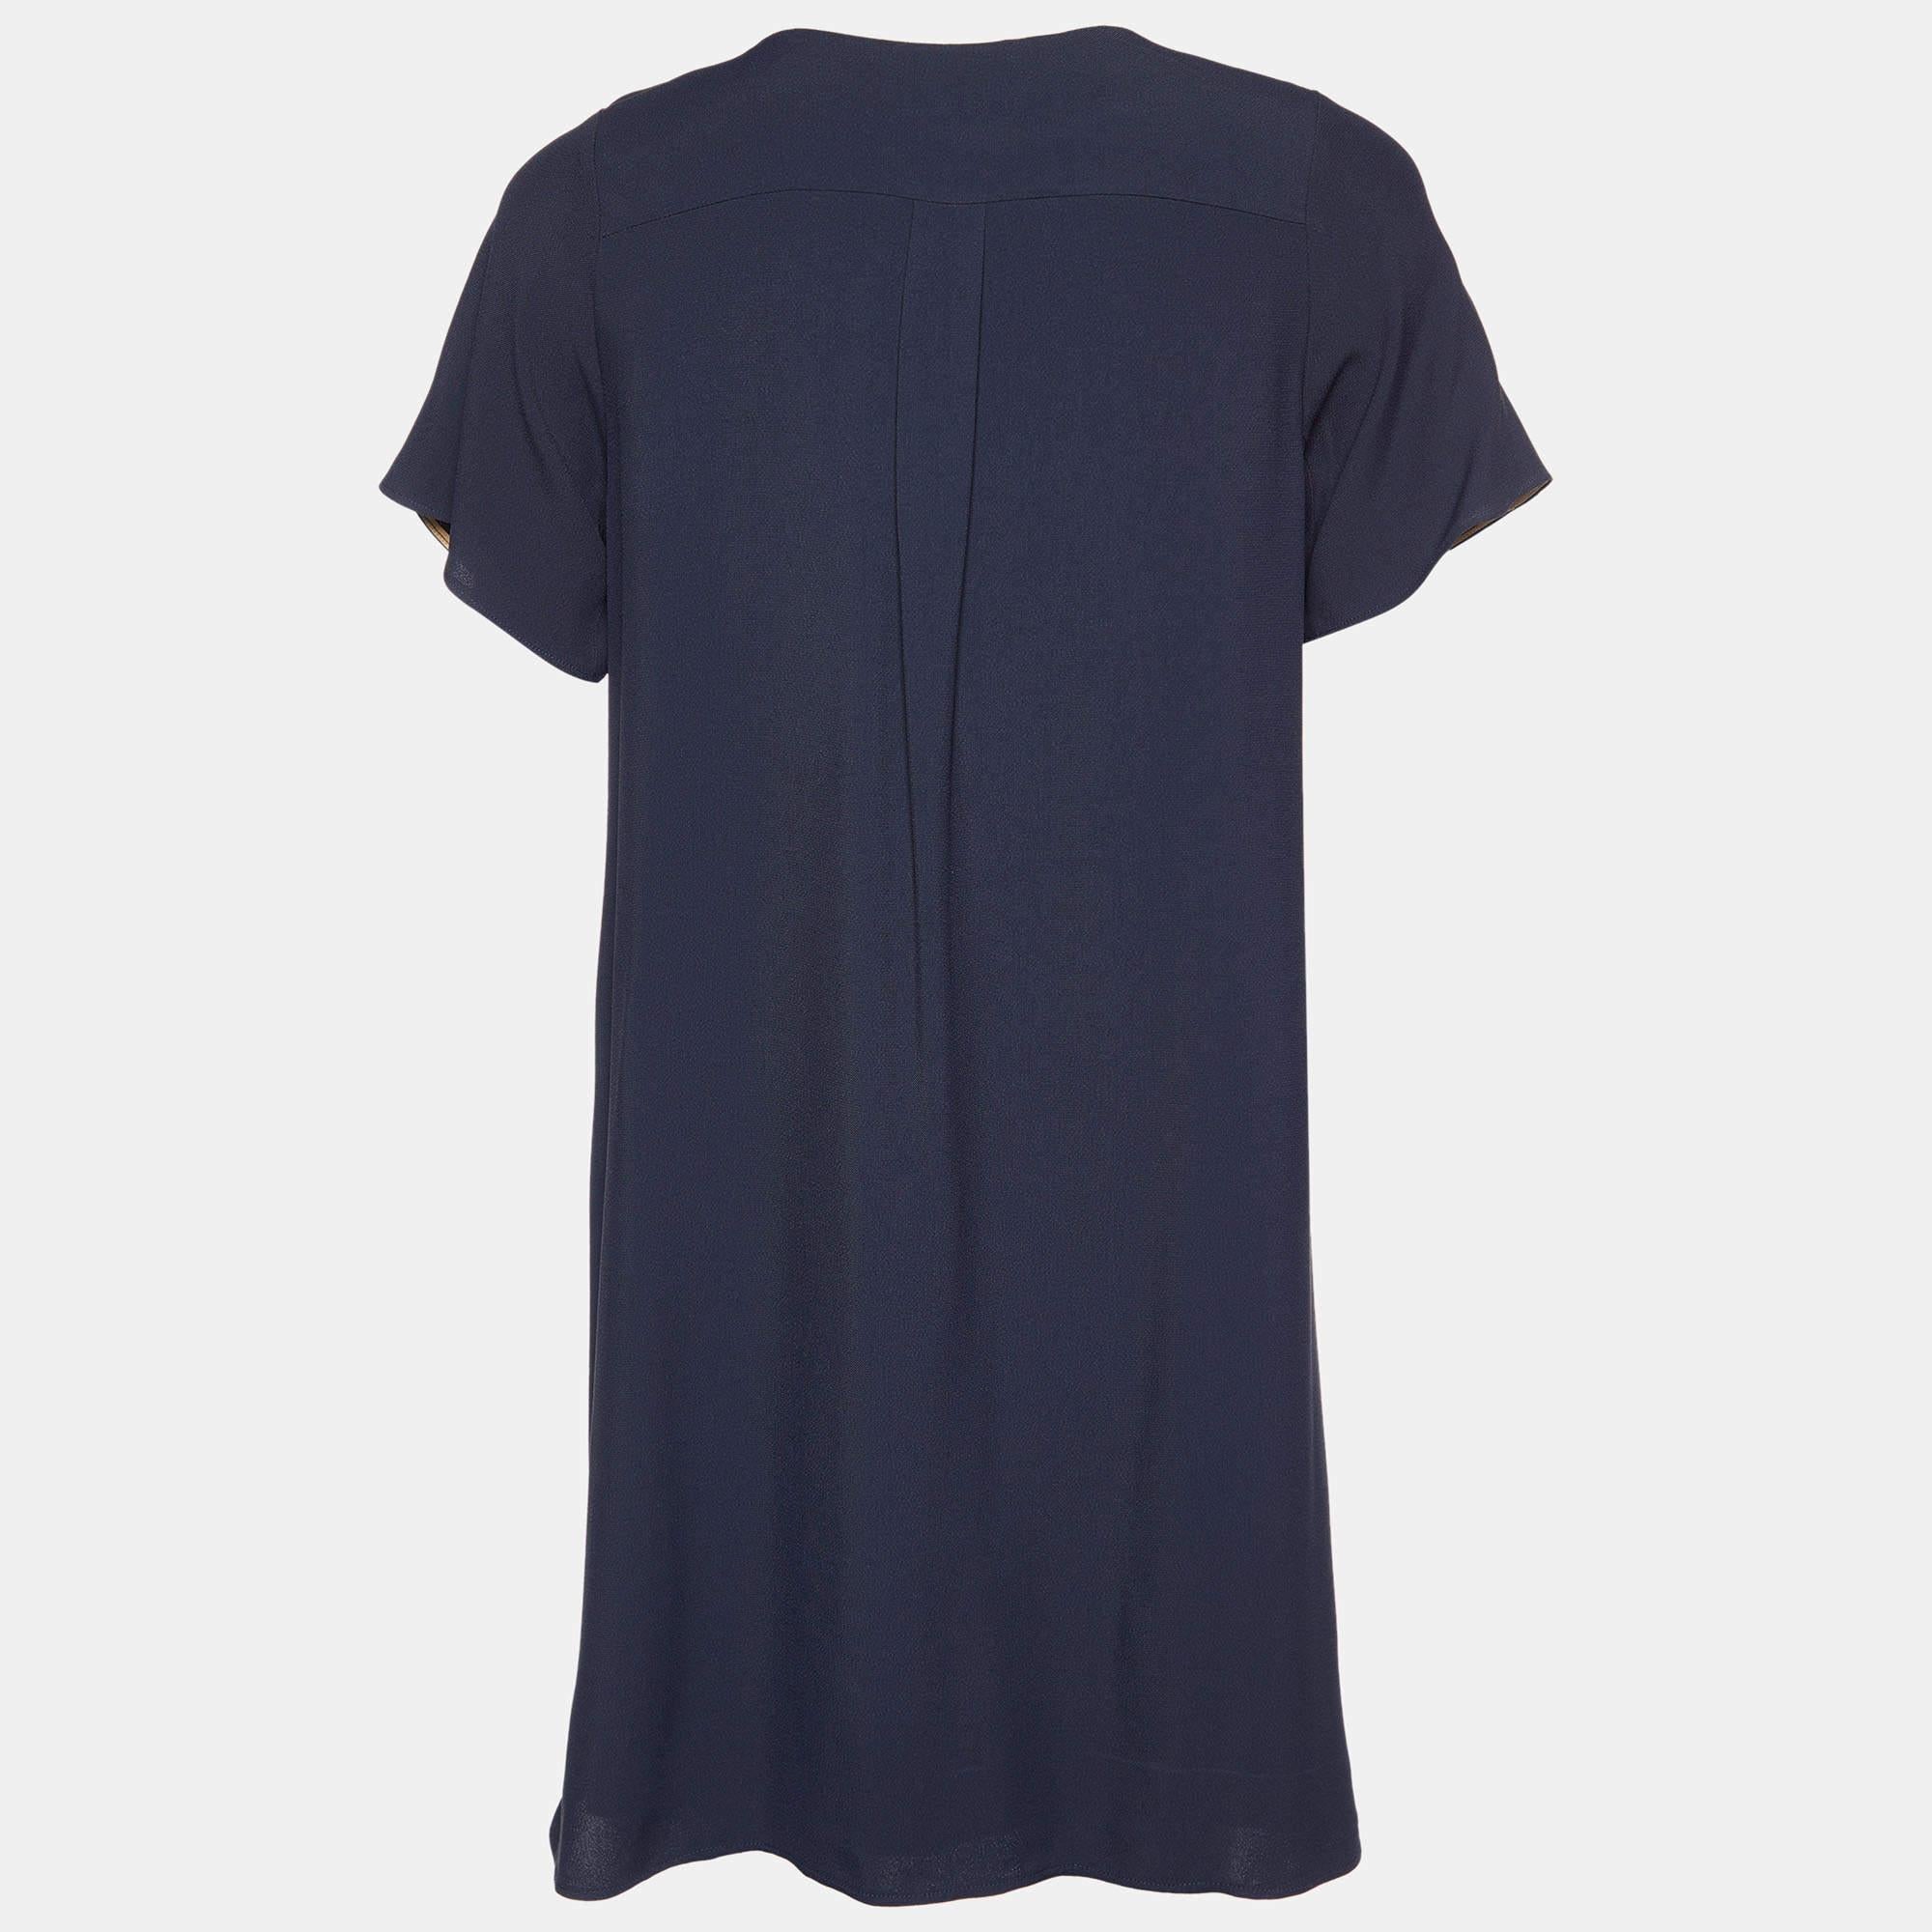 This dress designed by Chloé is here to a dash of panache to your ensemble. It is stitched using comfortable, good-quality fabric and flaunts an attractive silhouette.

Includes: Brand Tag